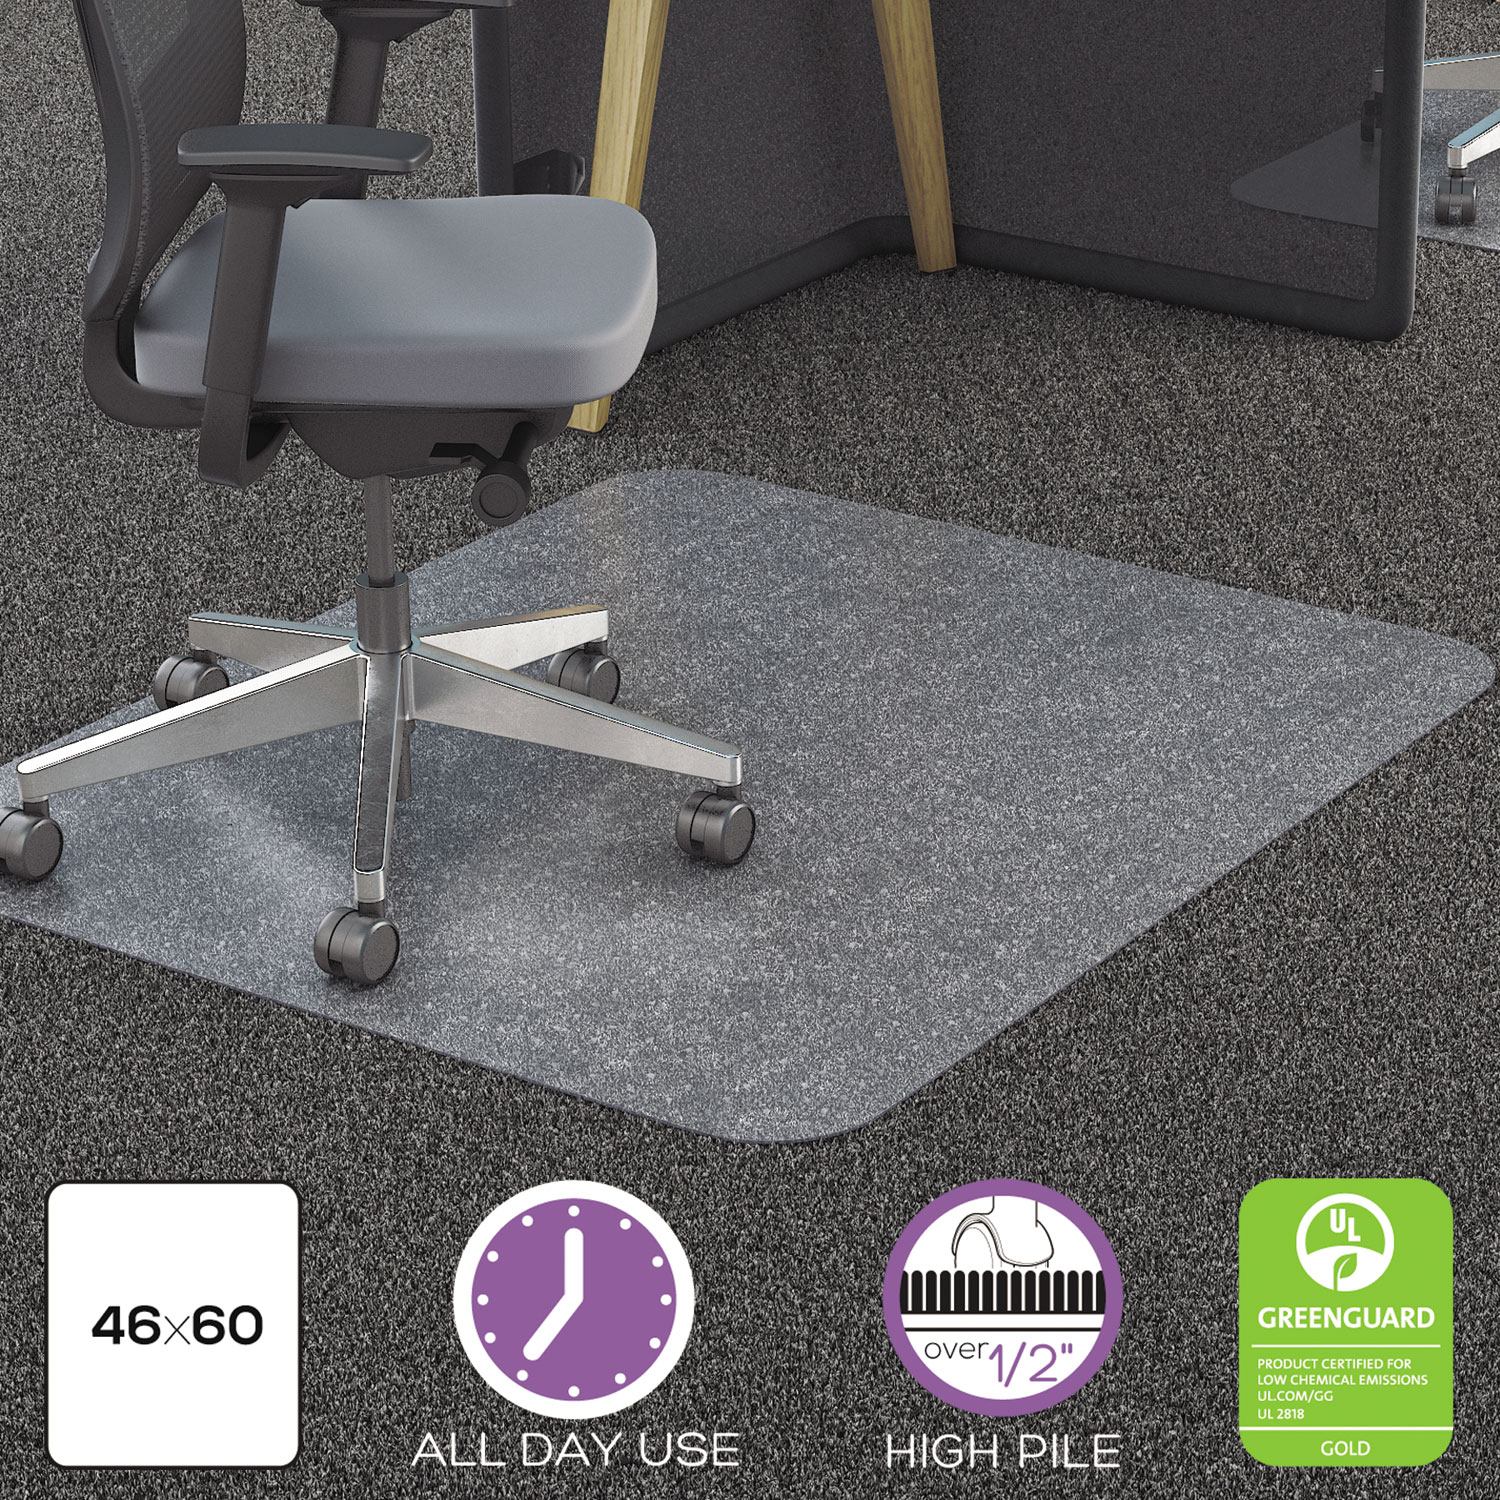  deflecto CM11442FPC Polycarbonate All Day Use Chair Mat - All Carpet Types, 46 x 60, Rectangle, Clear (DEFCM11442FPC) 